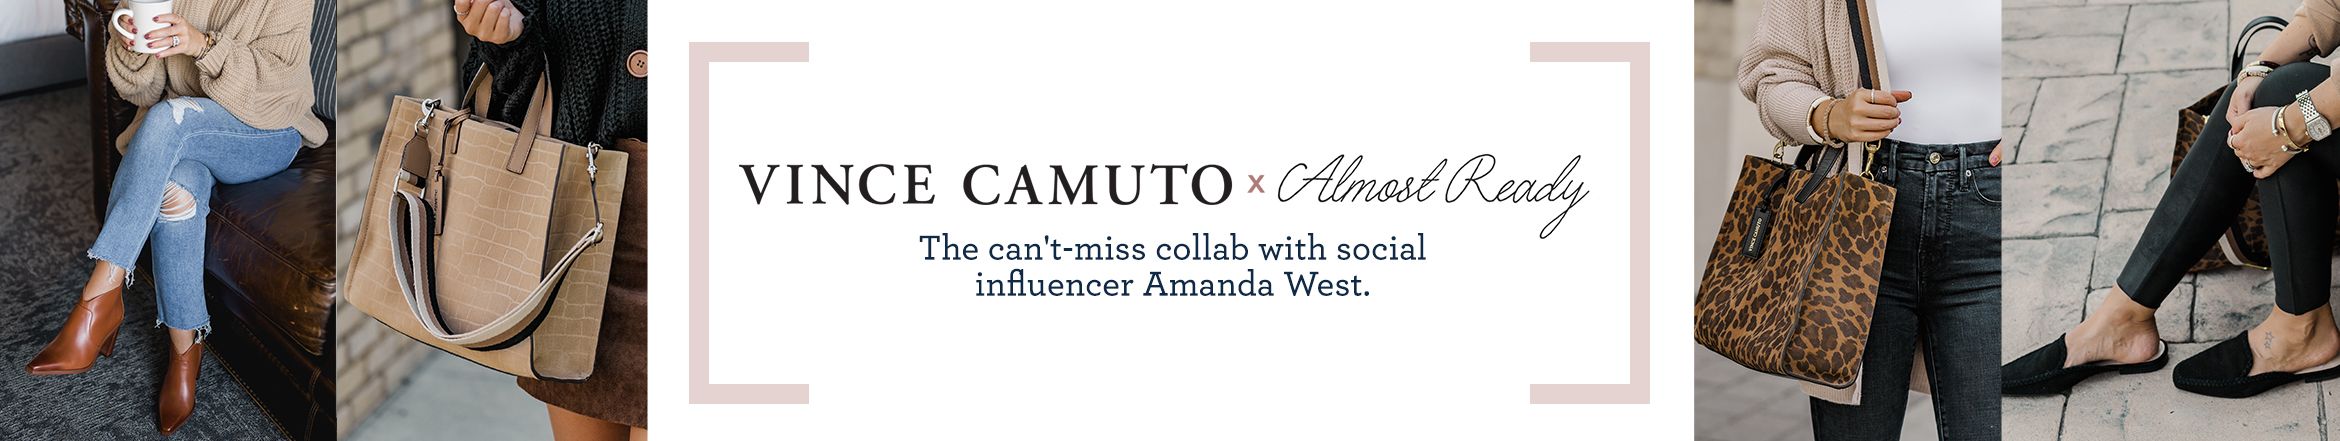 Vince Camuto x Almost Ready Collaboration: The can't-miss collab with social influencer Amanda West.